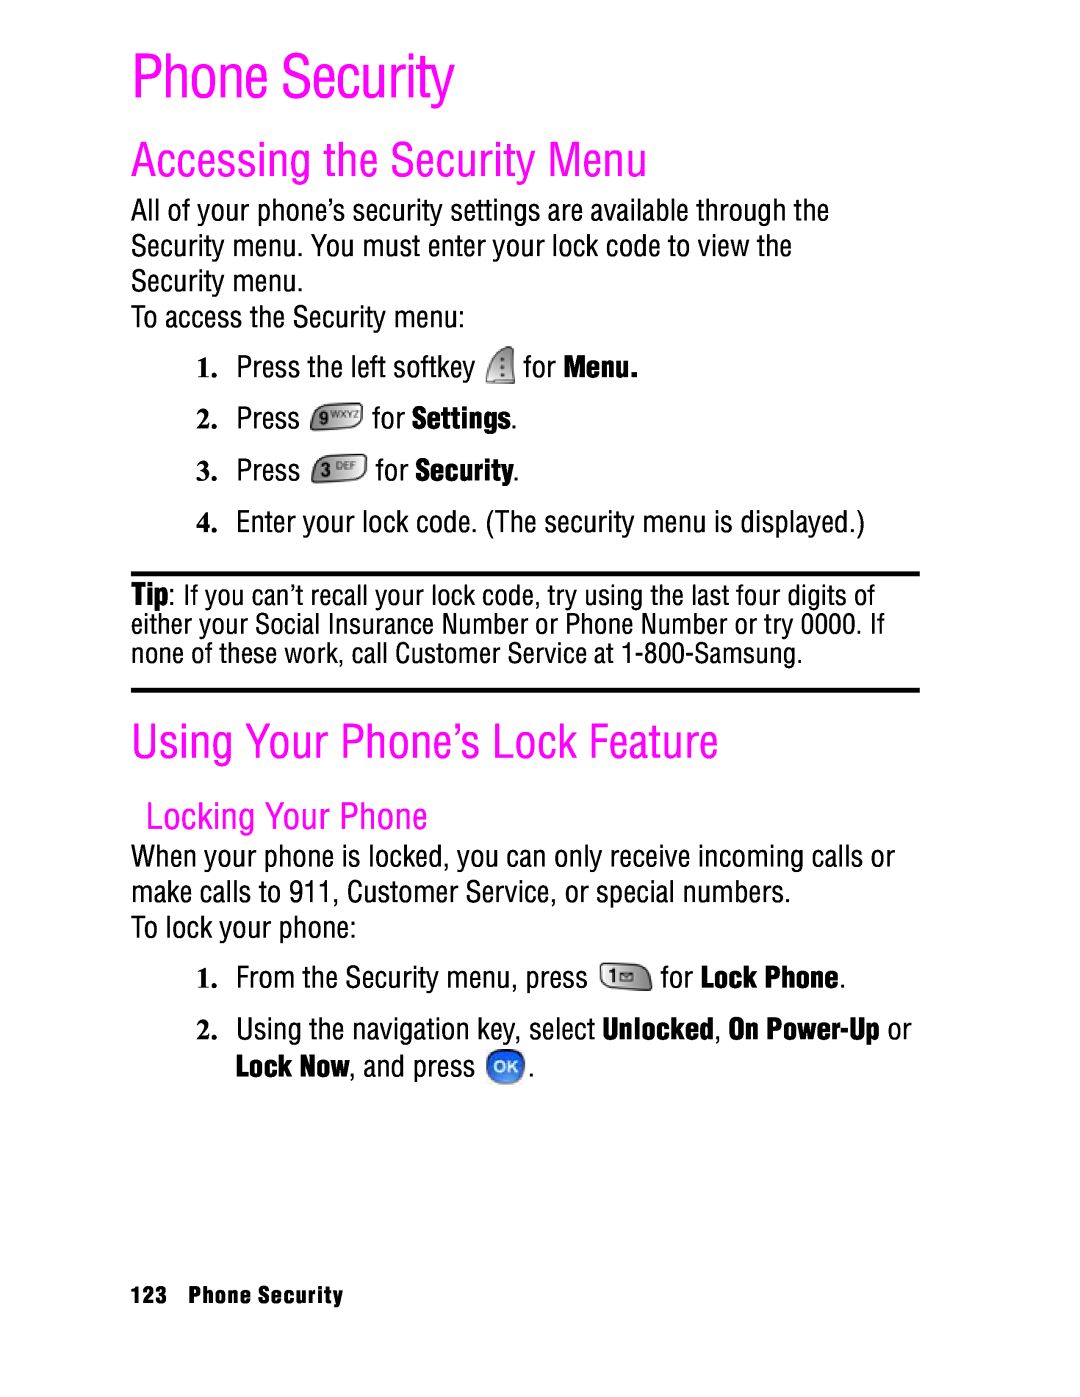 Samsung SPH-a740 manual Phone Security, Accessing the Security Menu, Using Your Phone’s Lock Feature, Locking Your Phone 